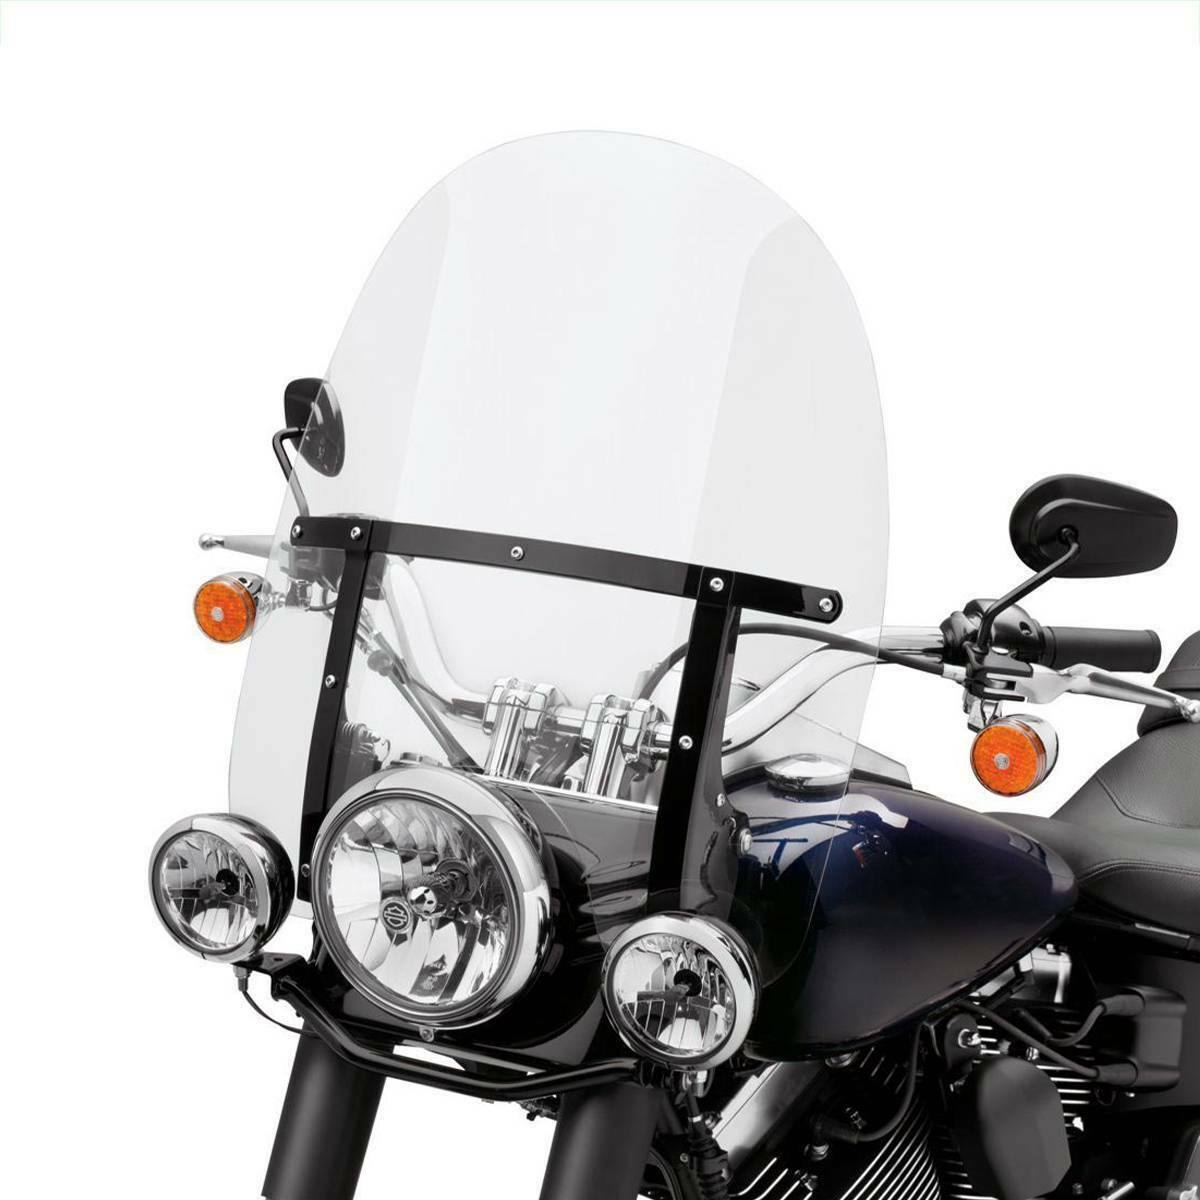 Clear PC Windscreen Windshield For Harley Softail Deluxe Fat Boy FLS 2000-2017 - Moto Life Products